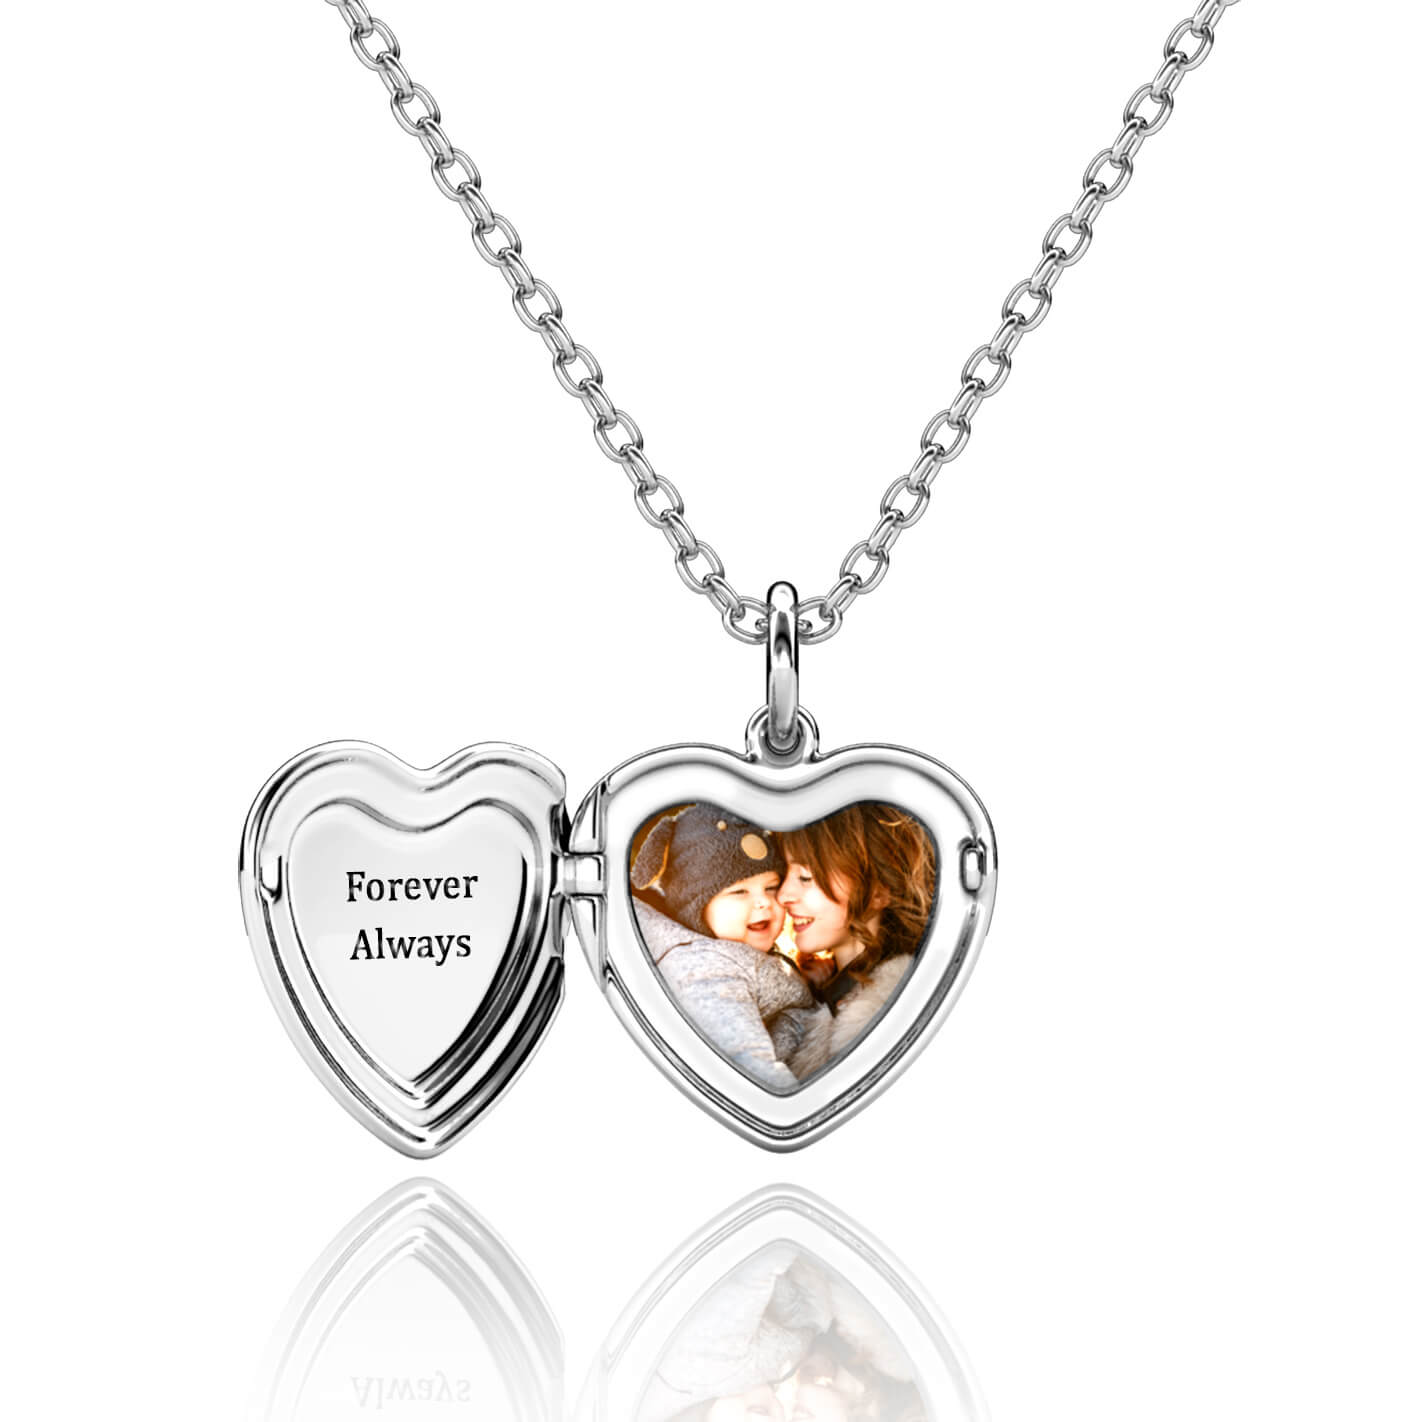 Heart Photo Locket Necklace with Engraving - Copper